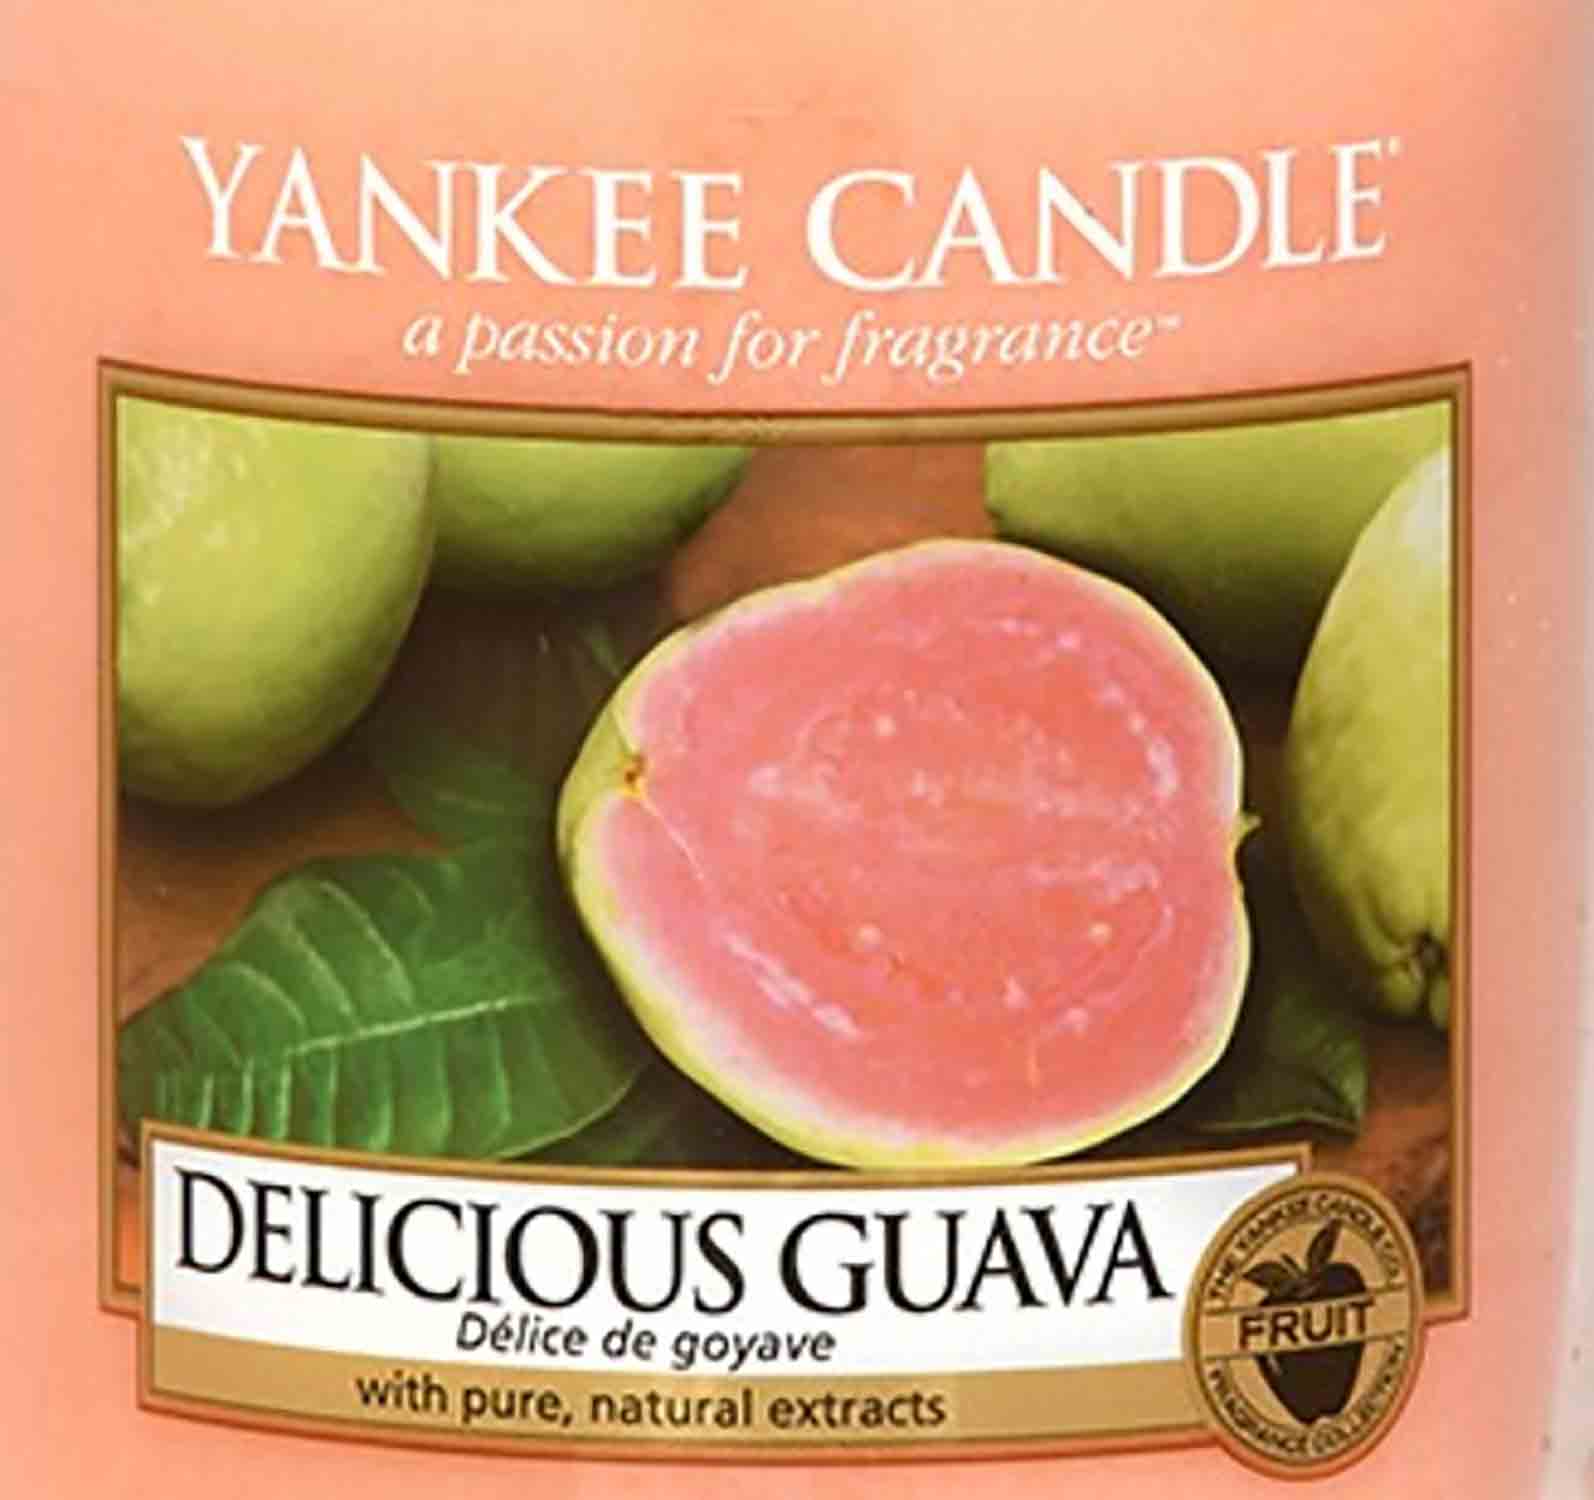 Yankee Candle Delicious Guava 22 g - Crumble vosk